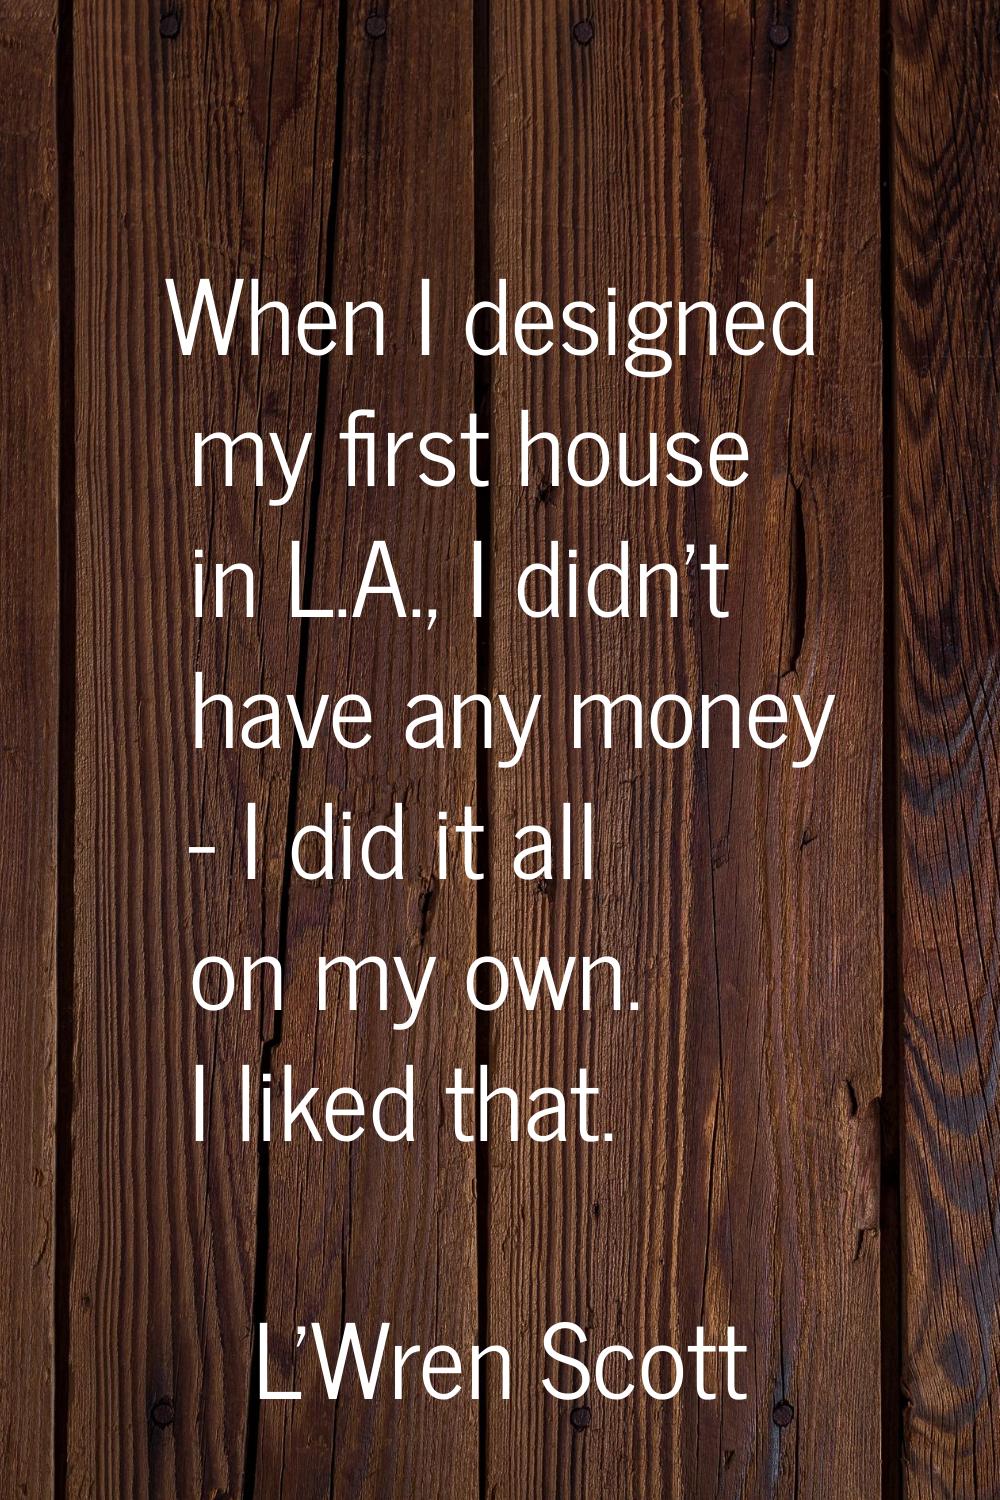 When I designed my first house in L.A., I didn't have any money - I did it all on my own. I liked t